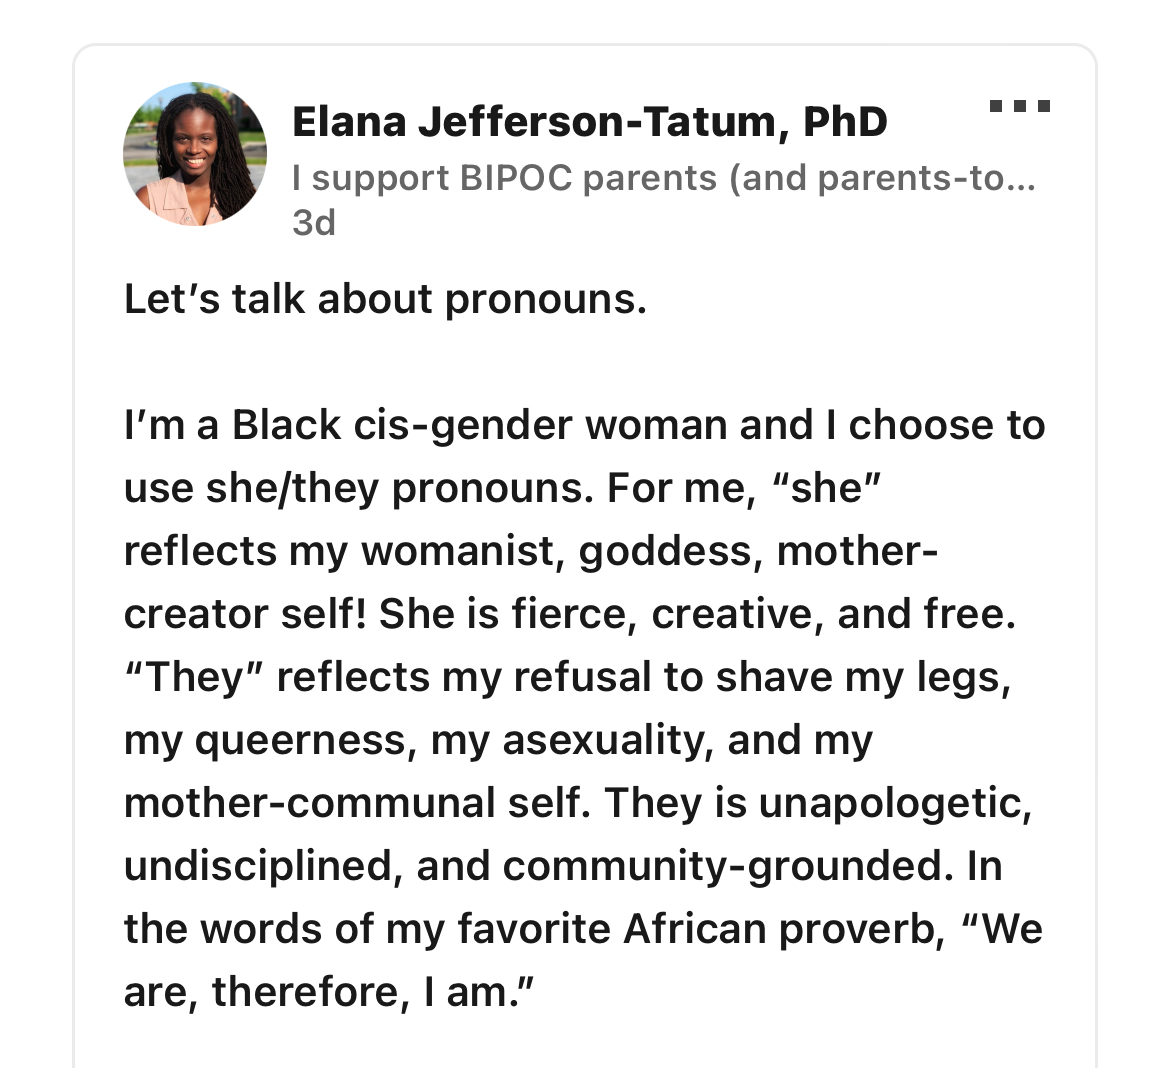 A Linkedin post from Elana Jefferson-Tatum, PhD that says: Let’s talk about pronouns. I’m a Black cis-gender woman and I choose to use she/they pronouns. For me, “she” reflects my womanist, goddess, mother-creator self! She is fierce, creative, and free. “They” reflects my refusal to shave my legs, my queerness, my asexuality, and my mother-communal self. They is unapologetic, undisciplined, and community-grounded. In the words of my favorite African proverb, “We are, therefore, I am.”